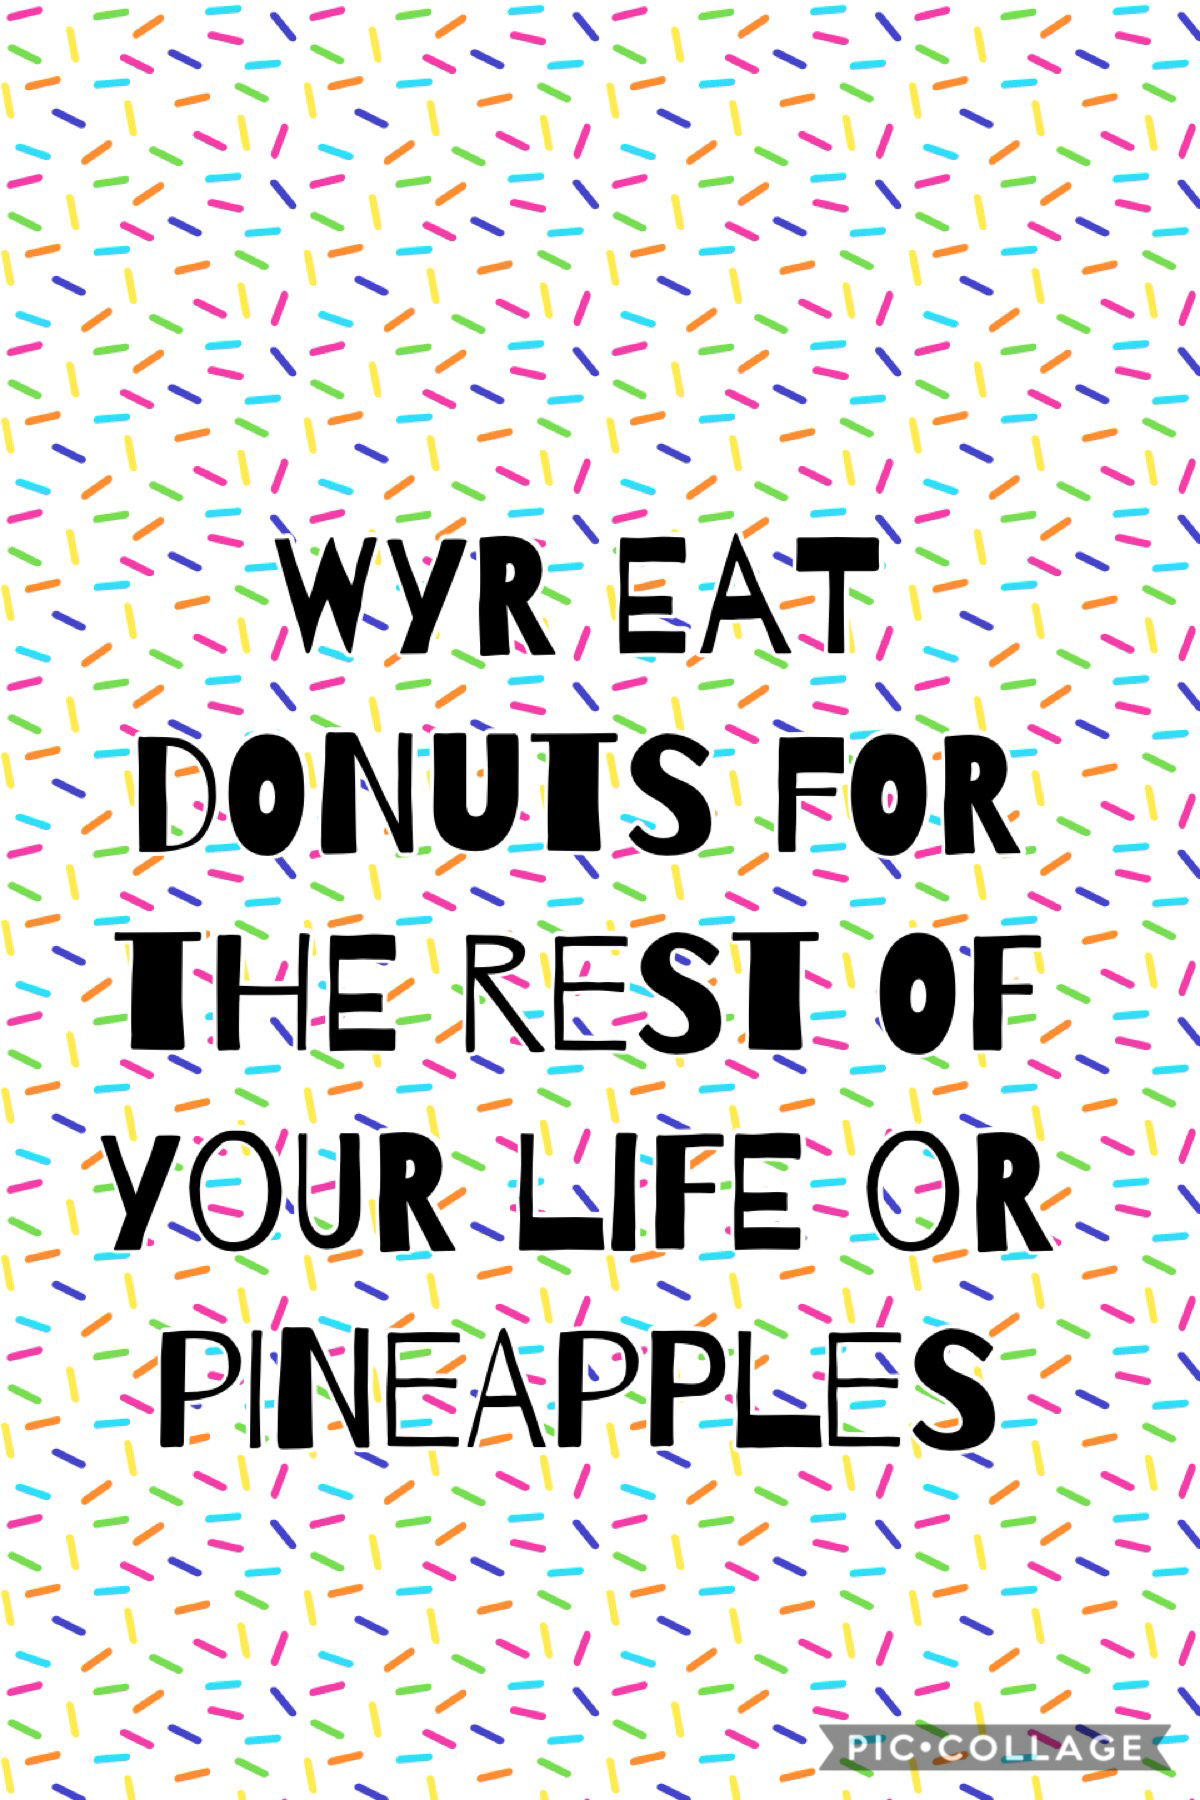 Pineapple or donuts 